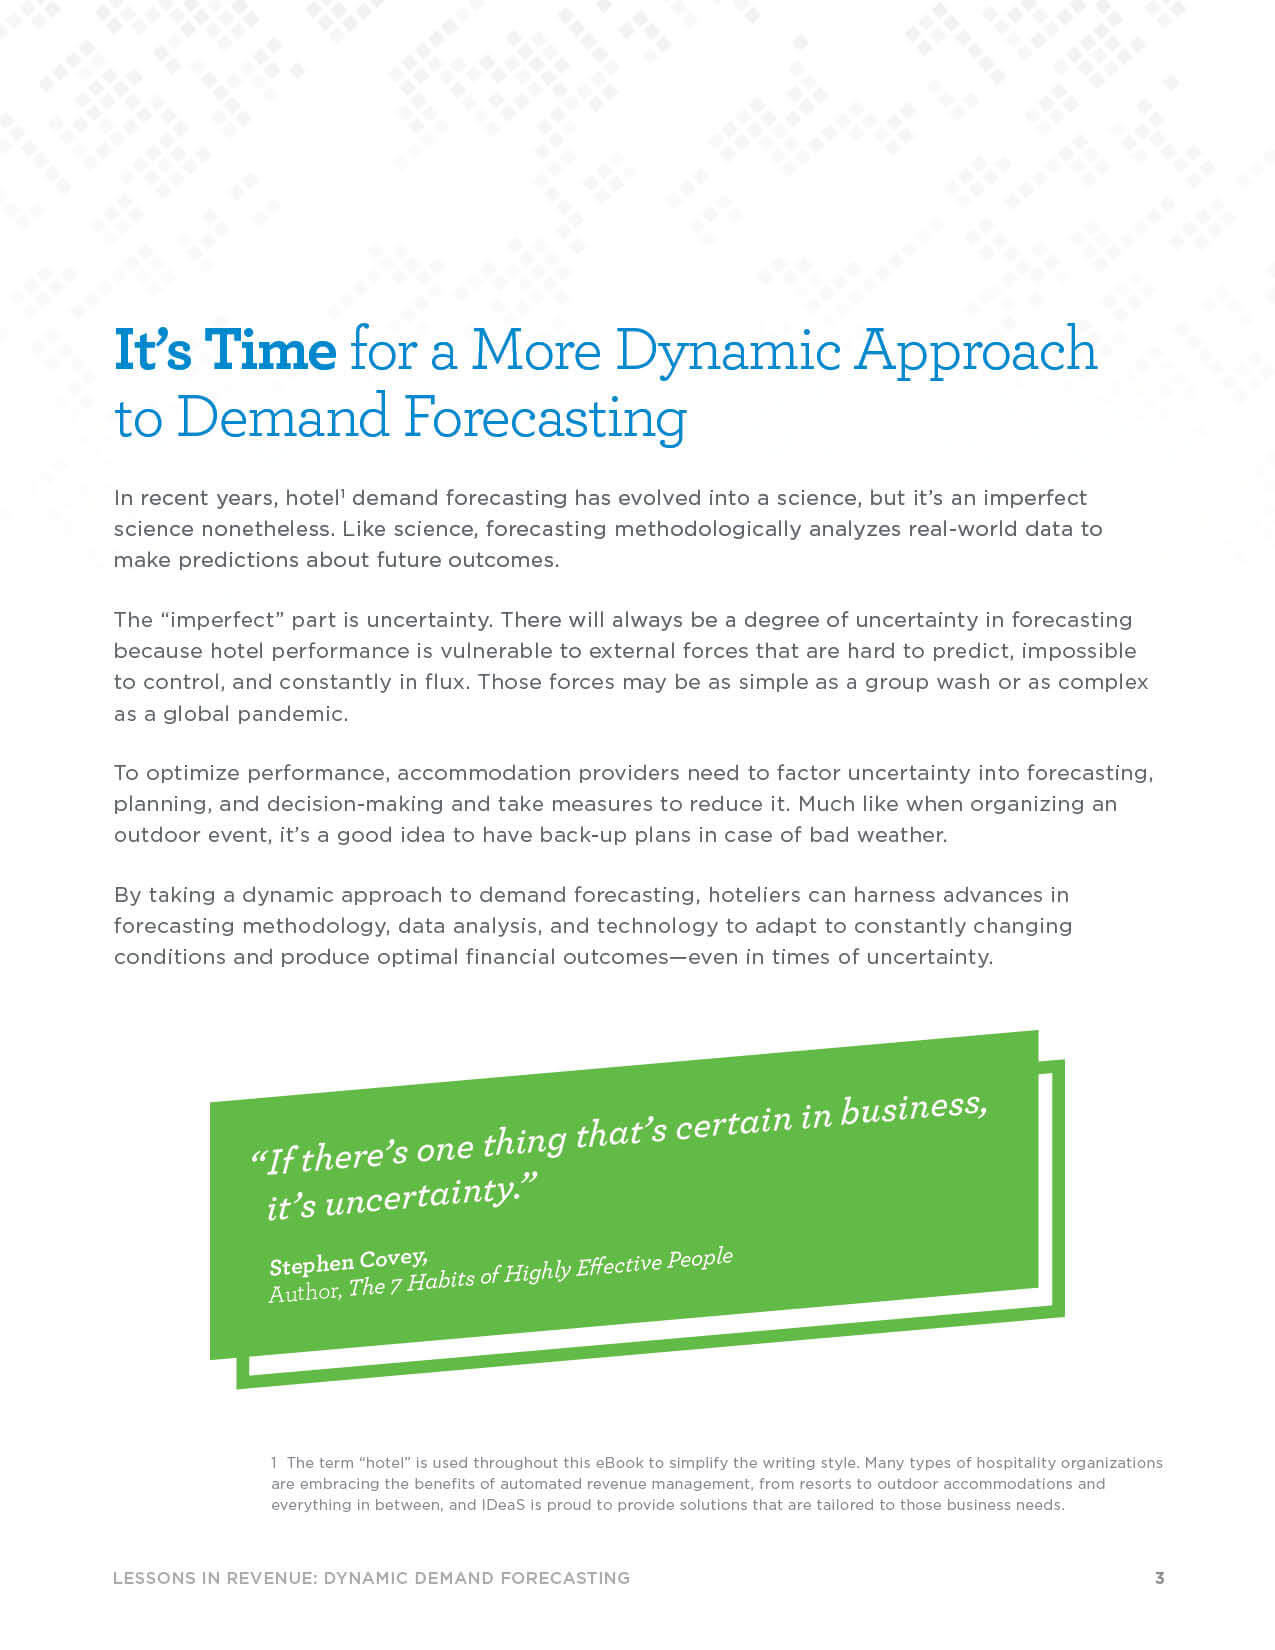 Page 3 - It’s Time for a More Dynamic Approach to Demand Forecasting